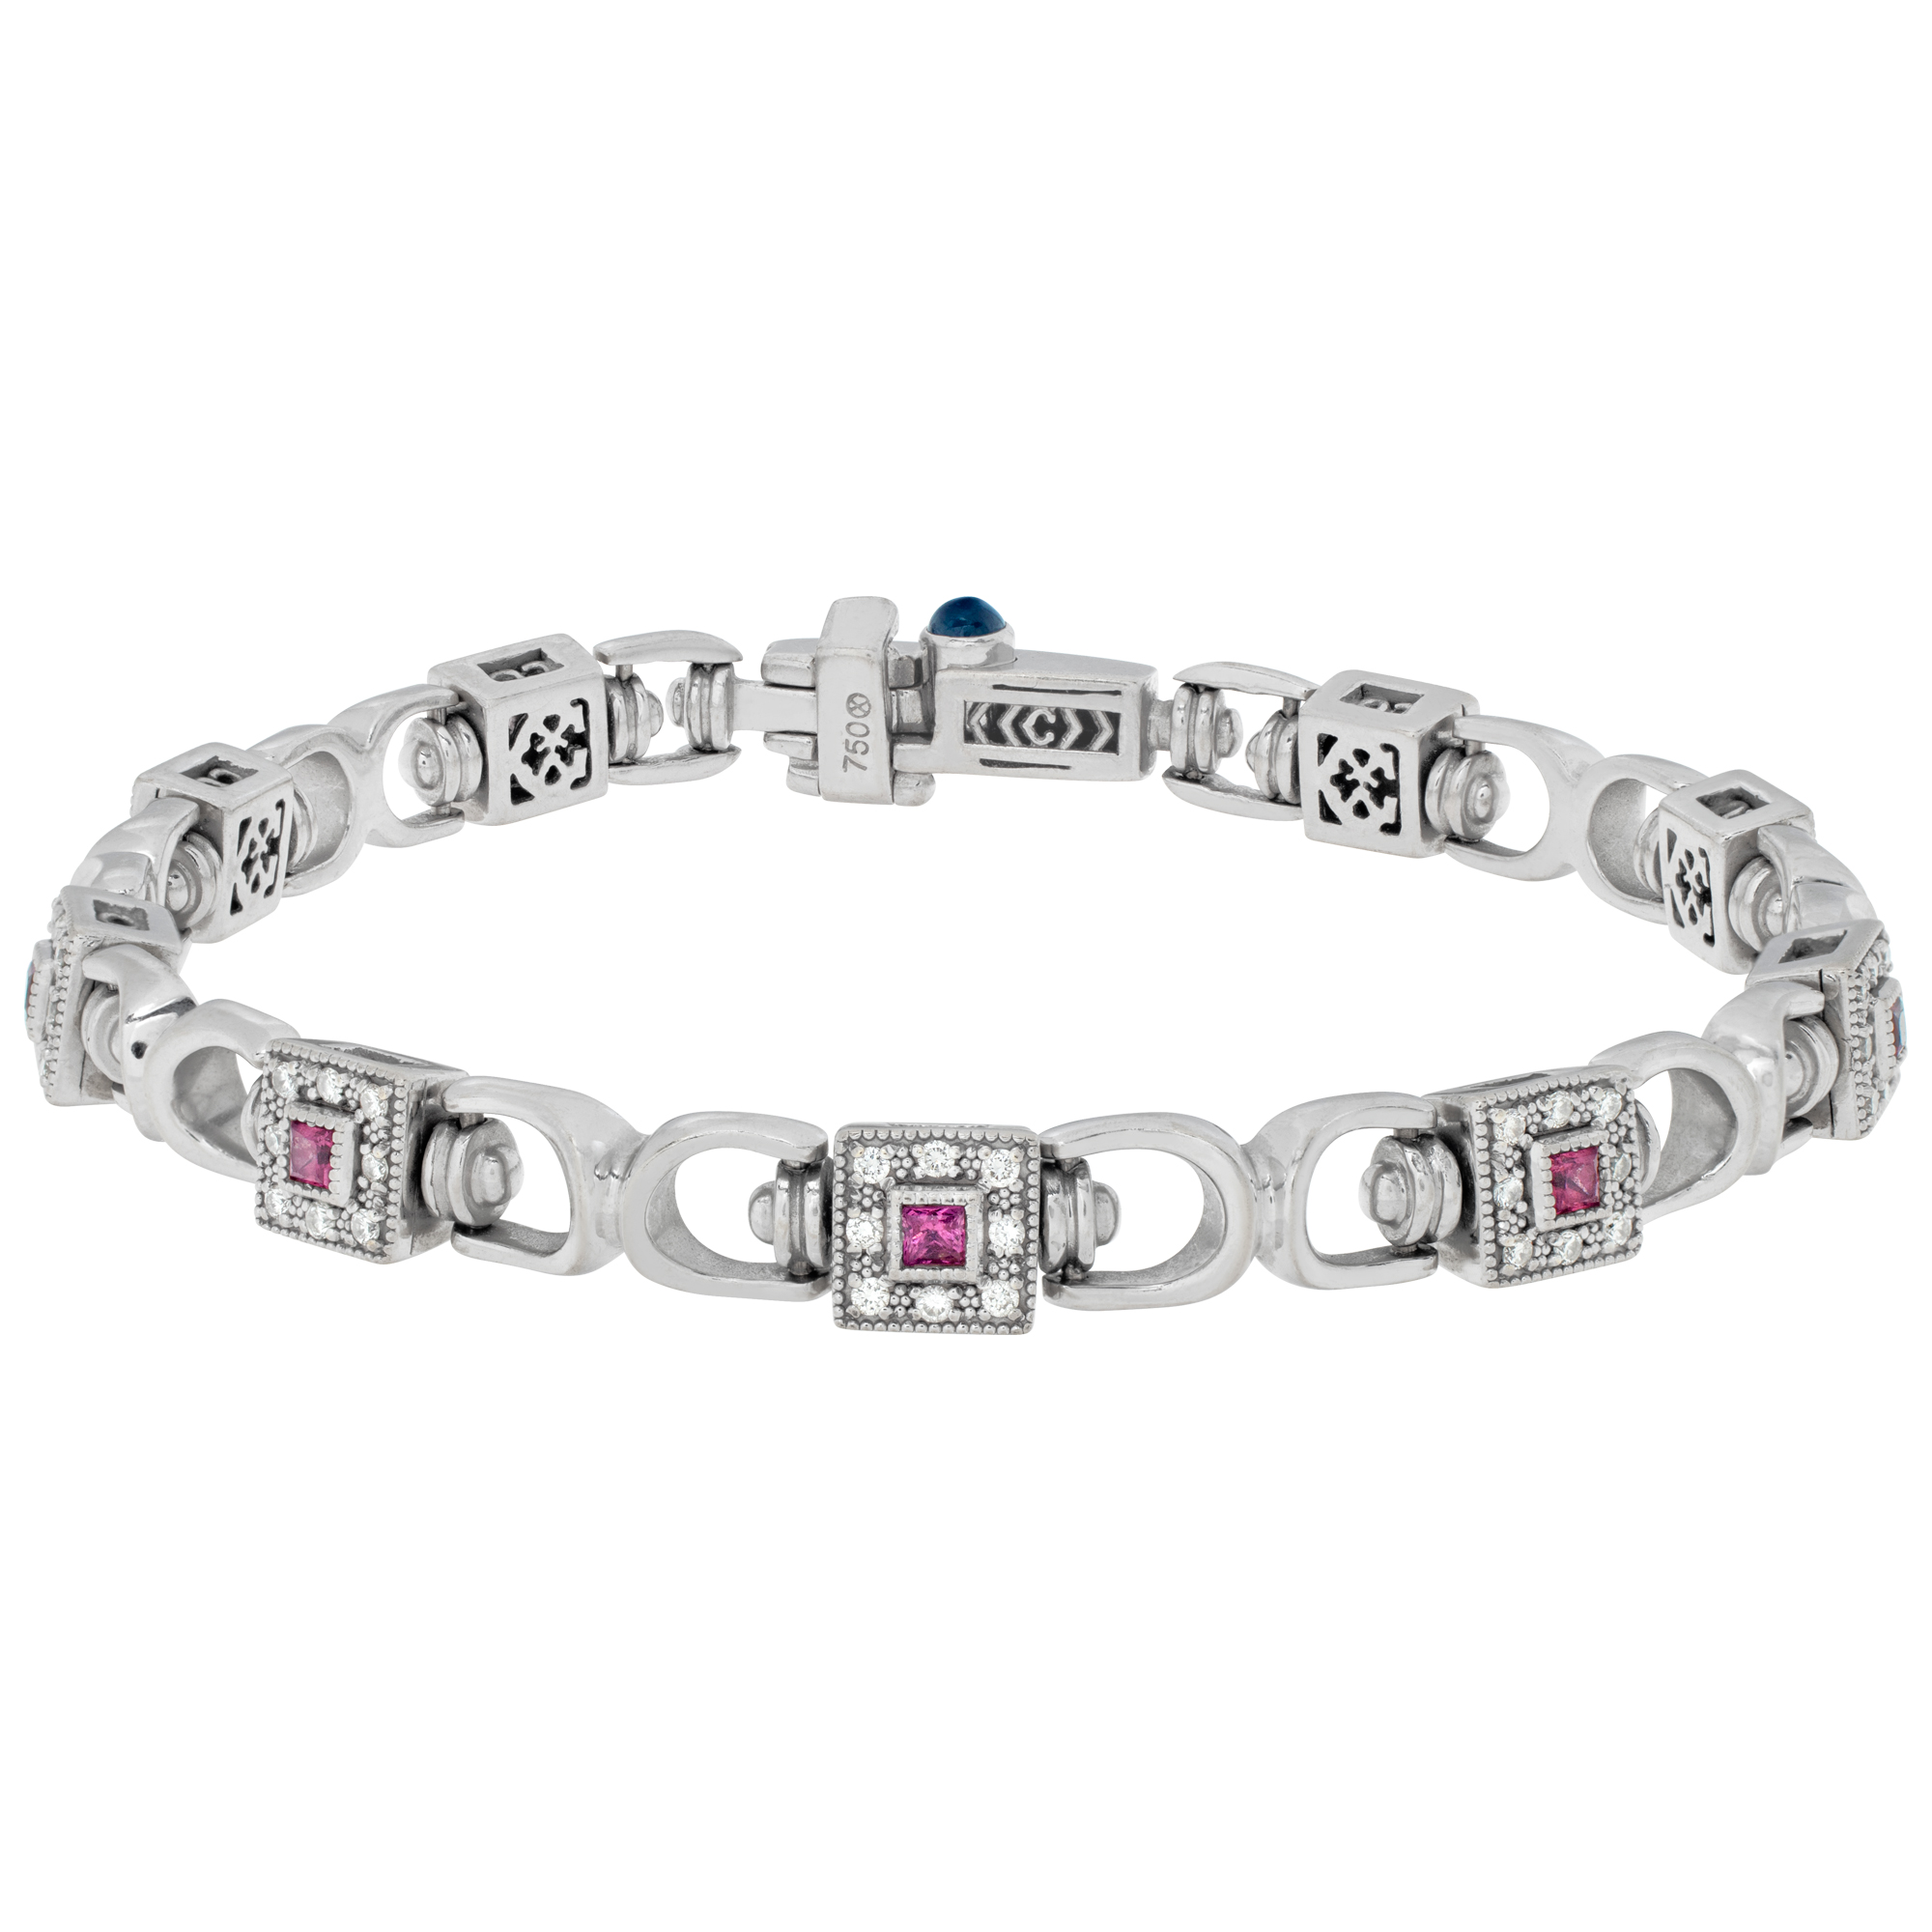 French Designer Charriol Heavy Link Diamonds & Pink Sapphires Bracelet. Round Brilliant Cut Diamonds Total Approx. Weight: 0.50 Carat. Length: 6.50 Inches.